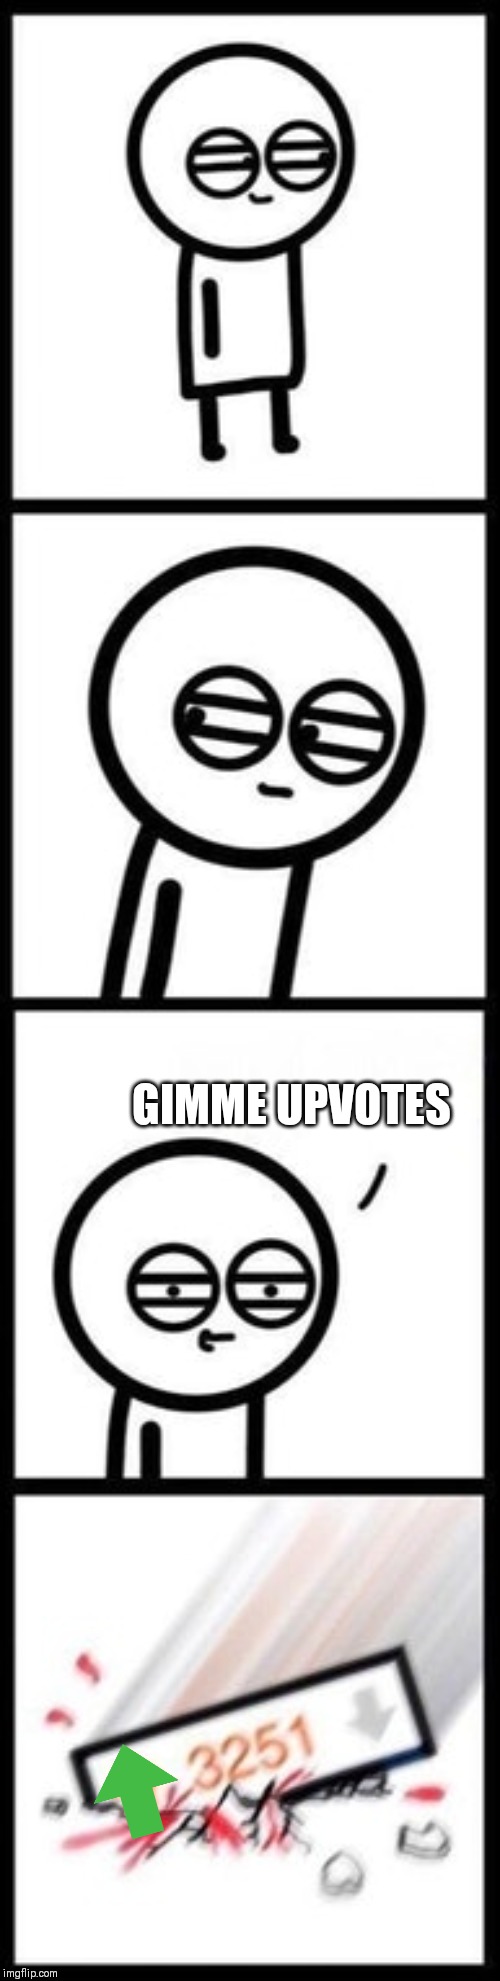 3251 upvotes | GIMME UPVOTES | image tagged in 3251 upvotes | made w/ Imgflip meme maker